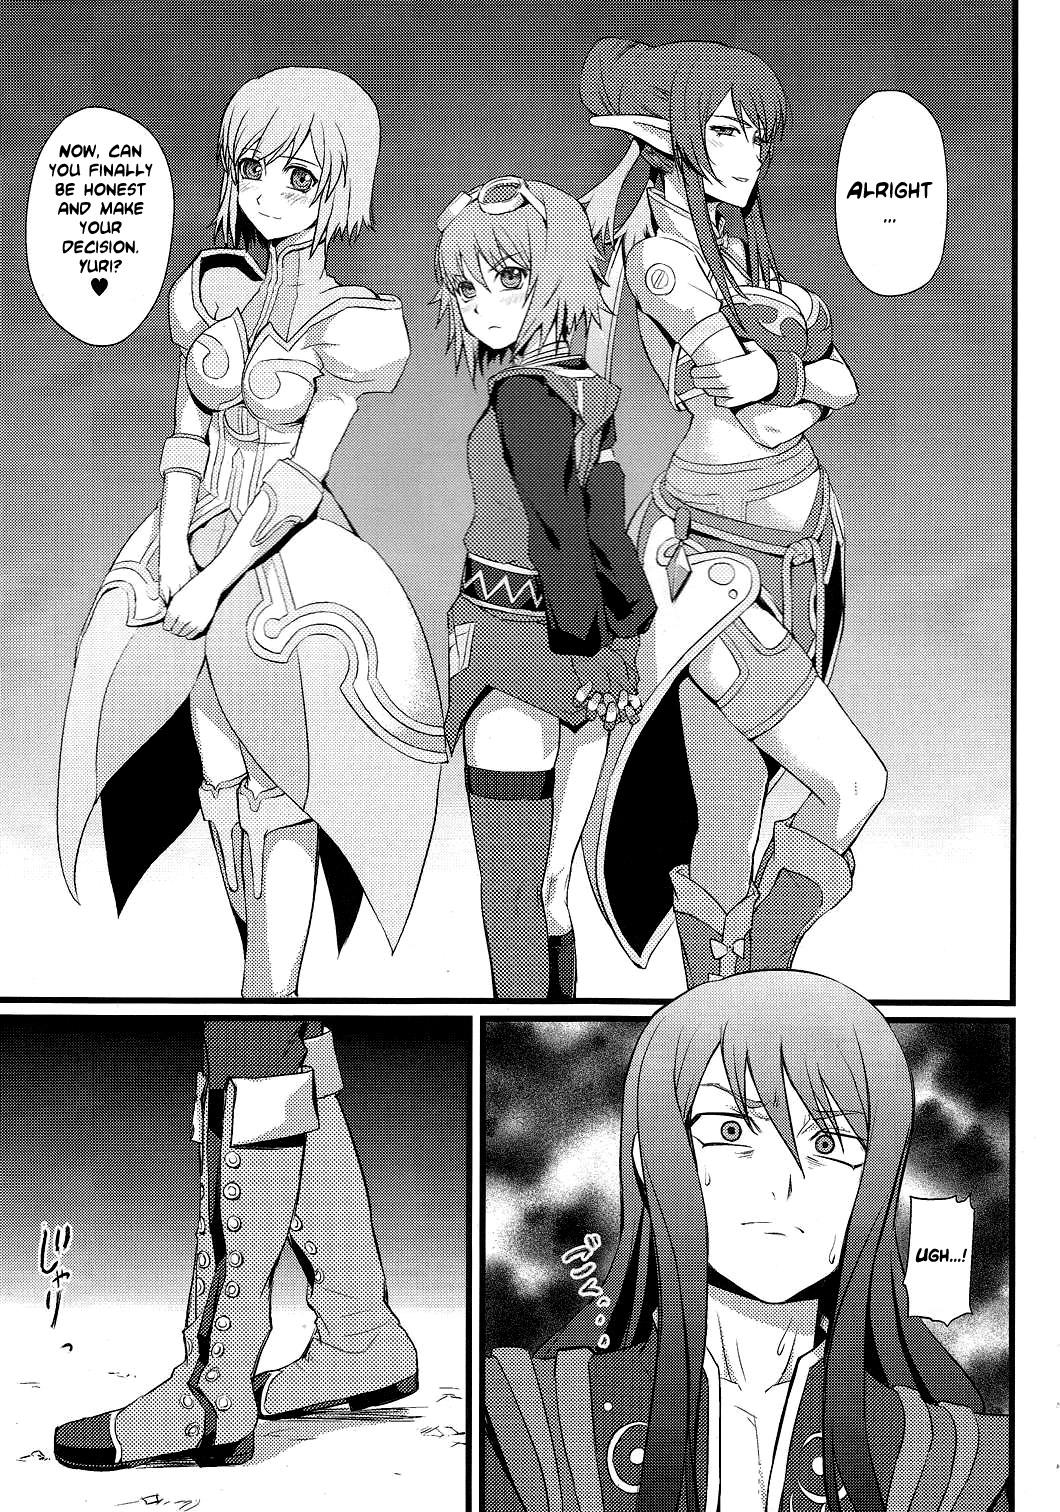 Cocksuckers Strike! Army of Beauties - Tales of vesperia Mexicano - Page 4